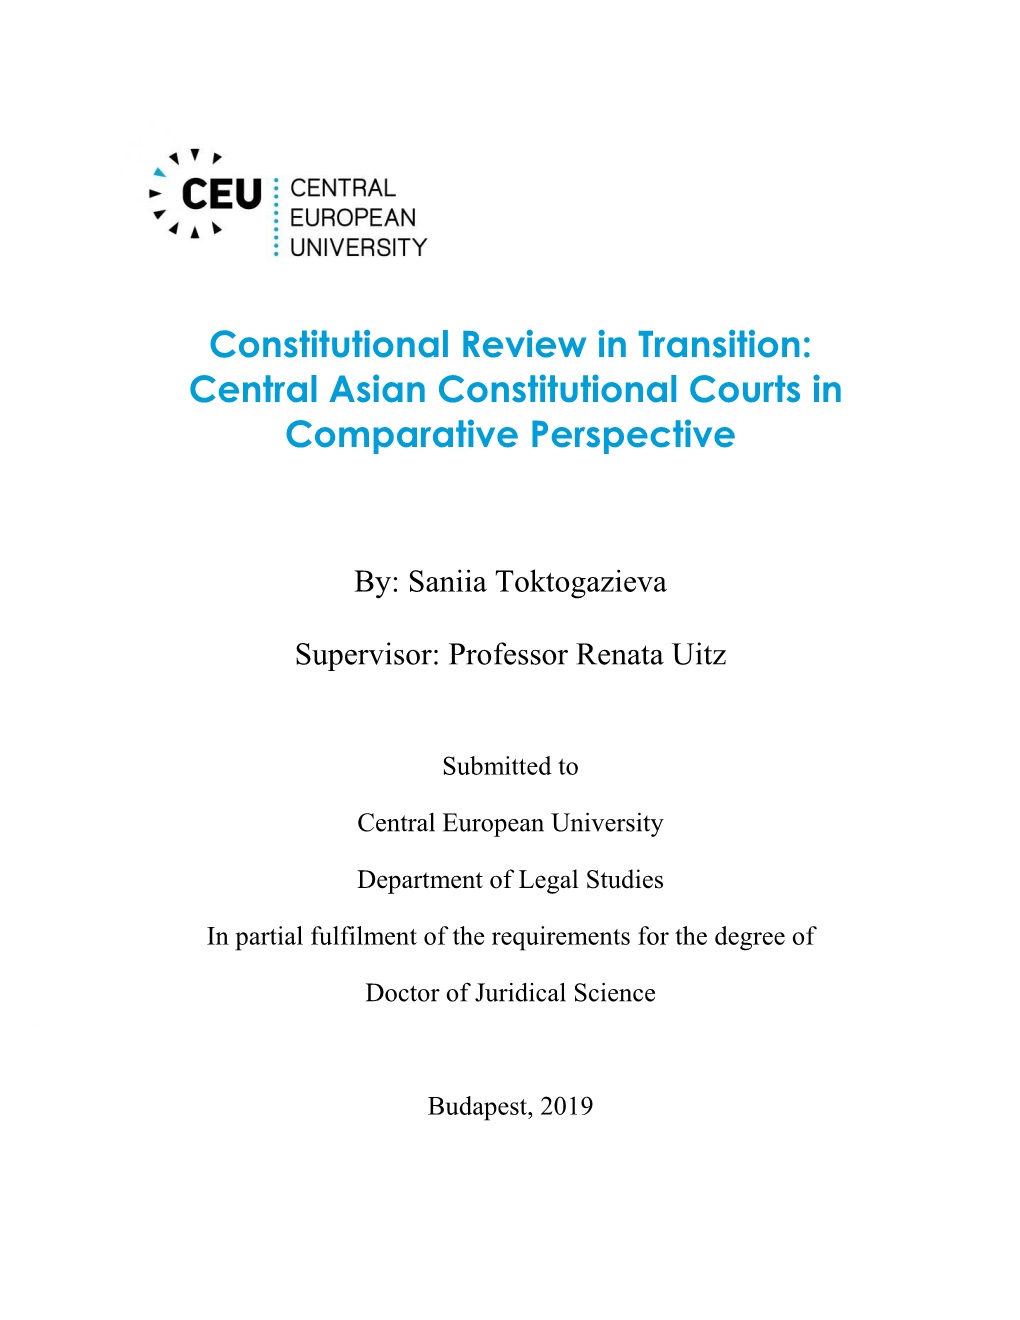 Constitutional Review in Transition: Central Asian Constitutional Courts in Comparative Perspective